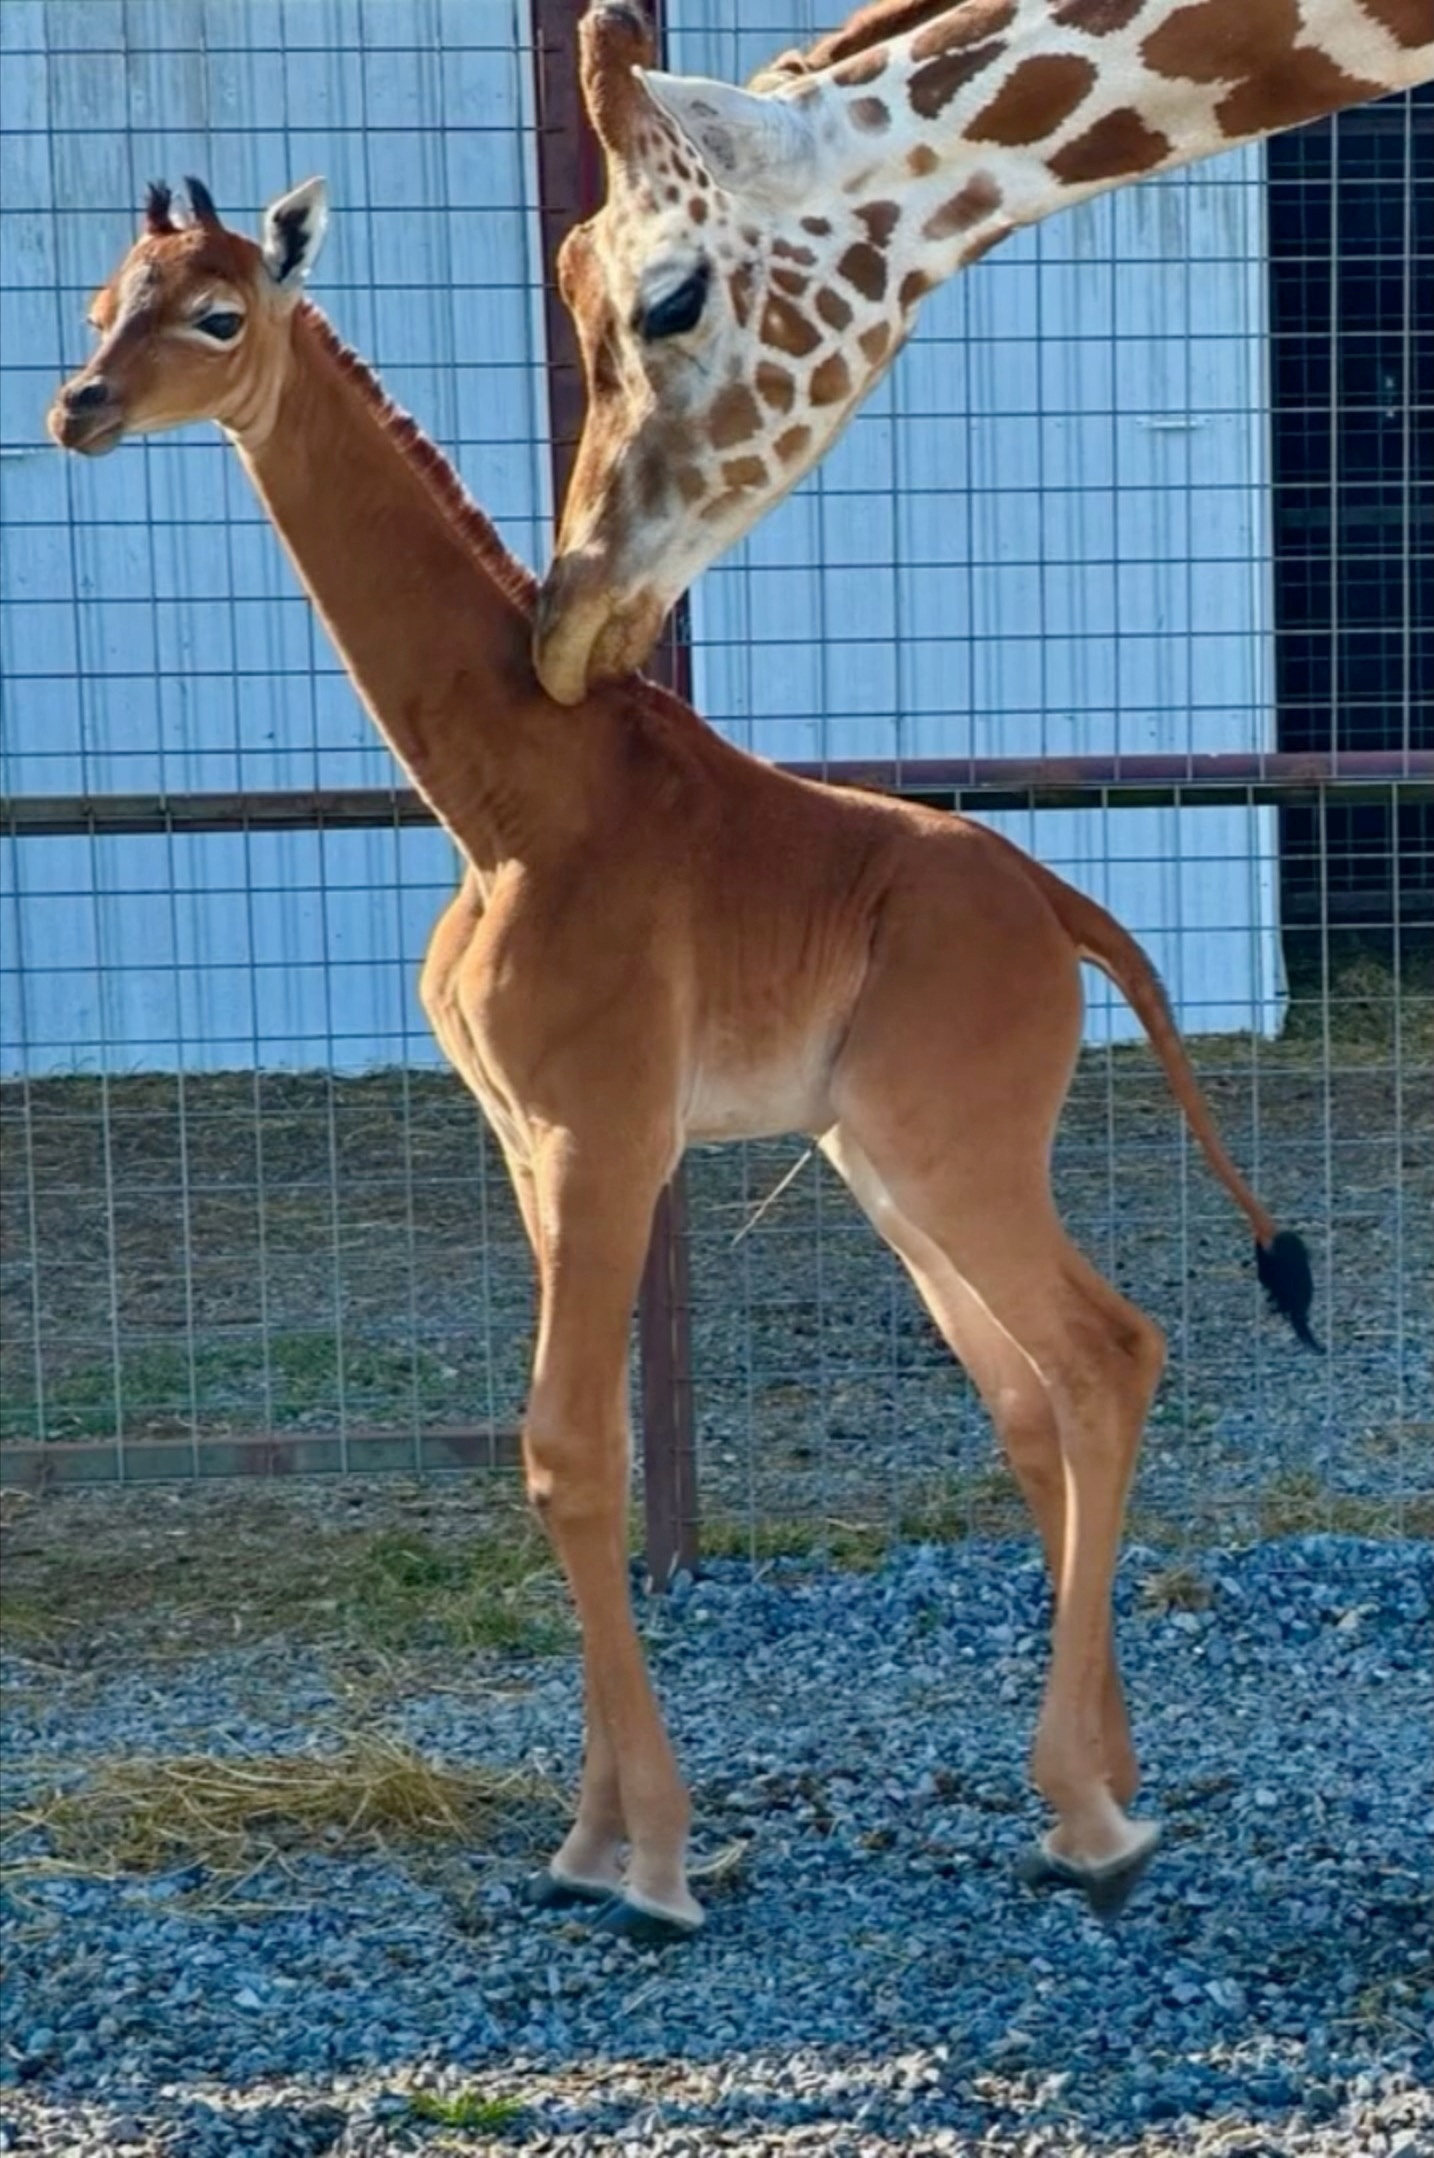 A rare spotless giraffe born at Bright’s Zoo is seen in Johnson City, Tennessee on Tuesday. Photo: Bright’s Zoo/TMX via Reuters